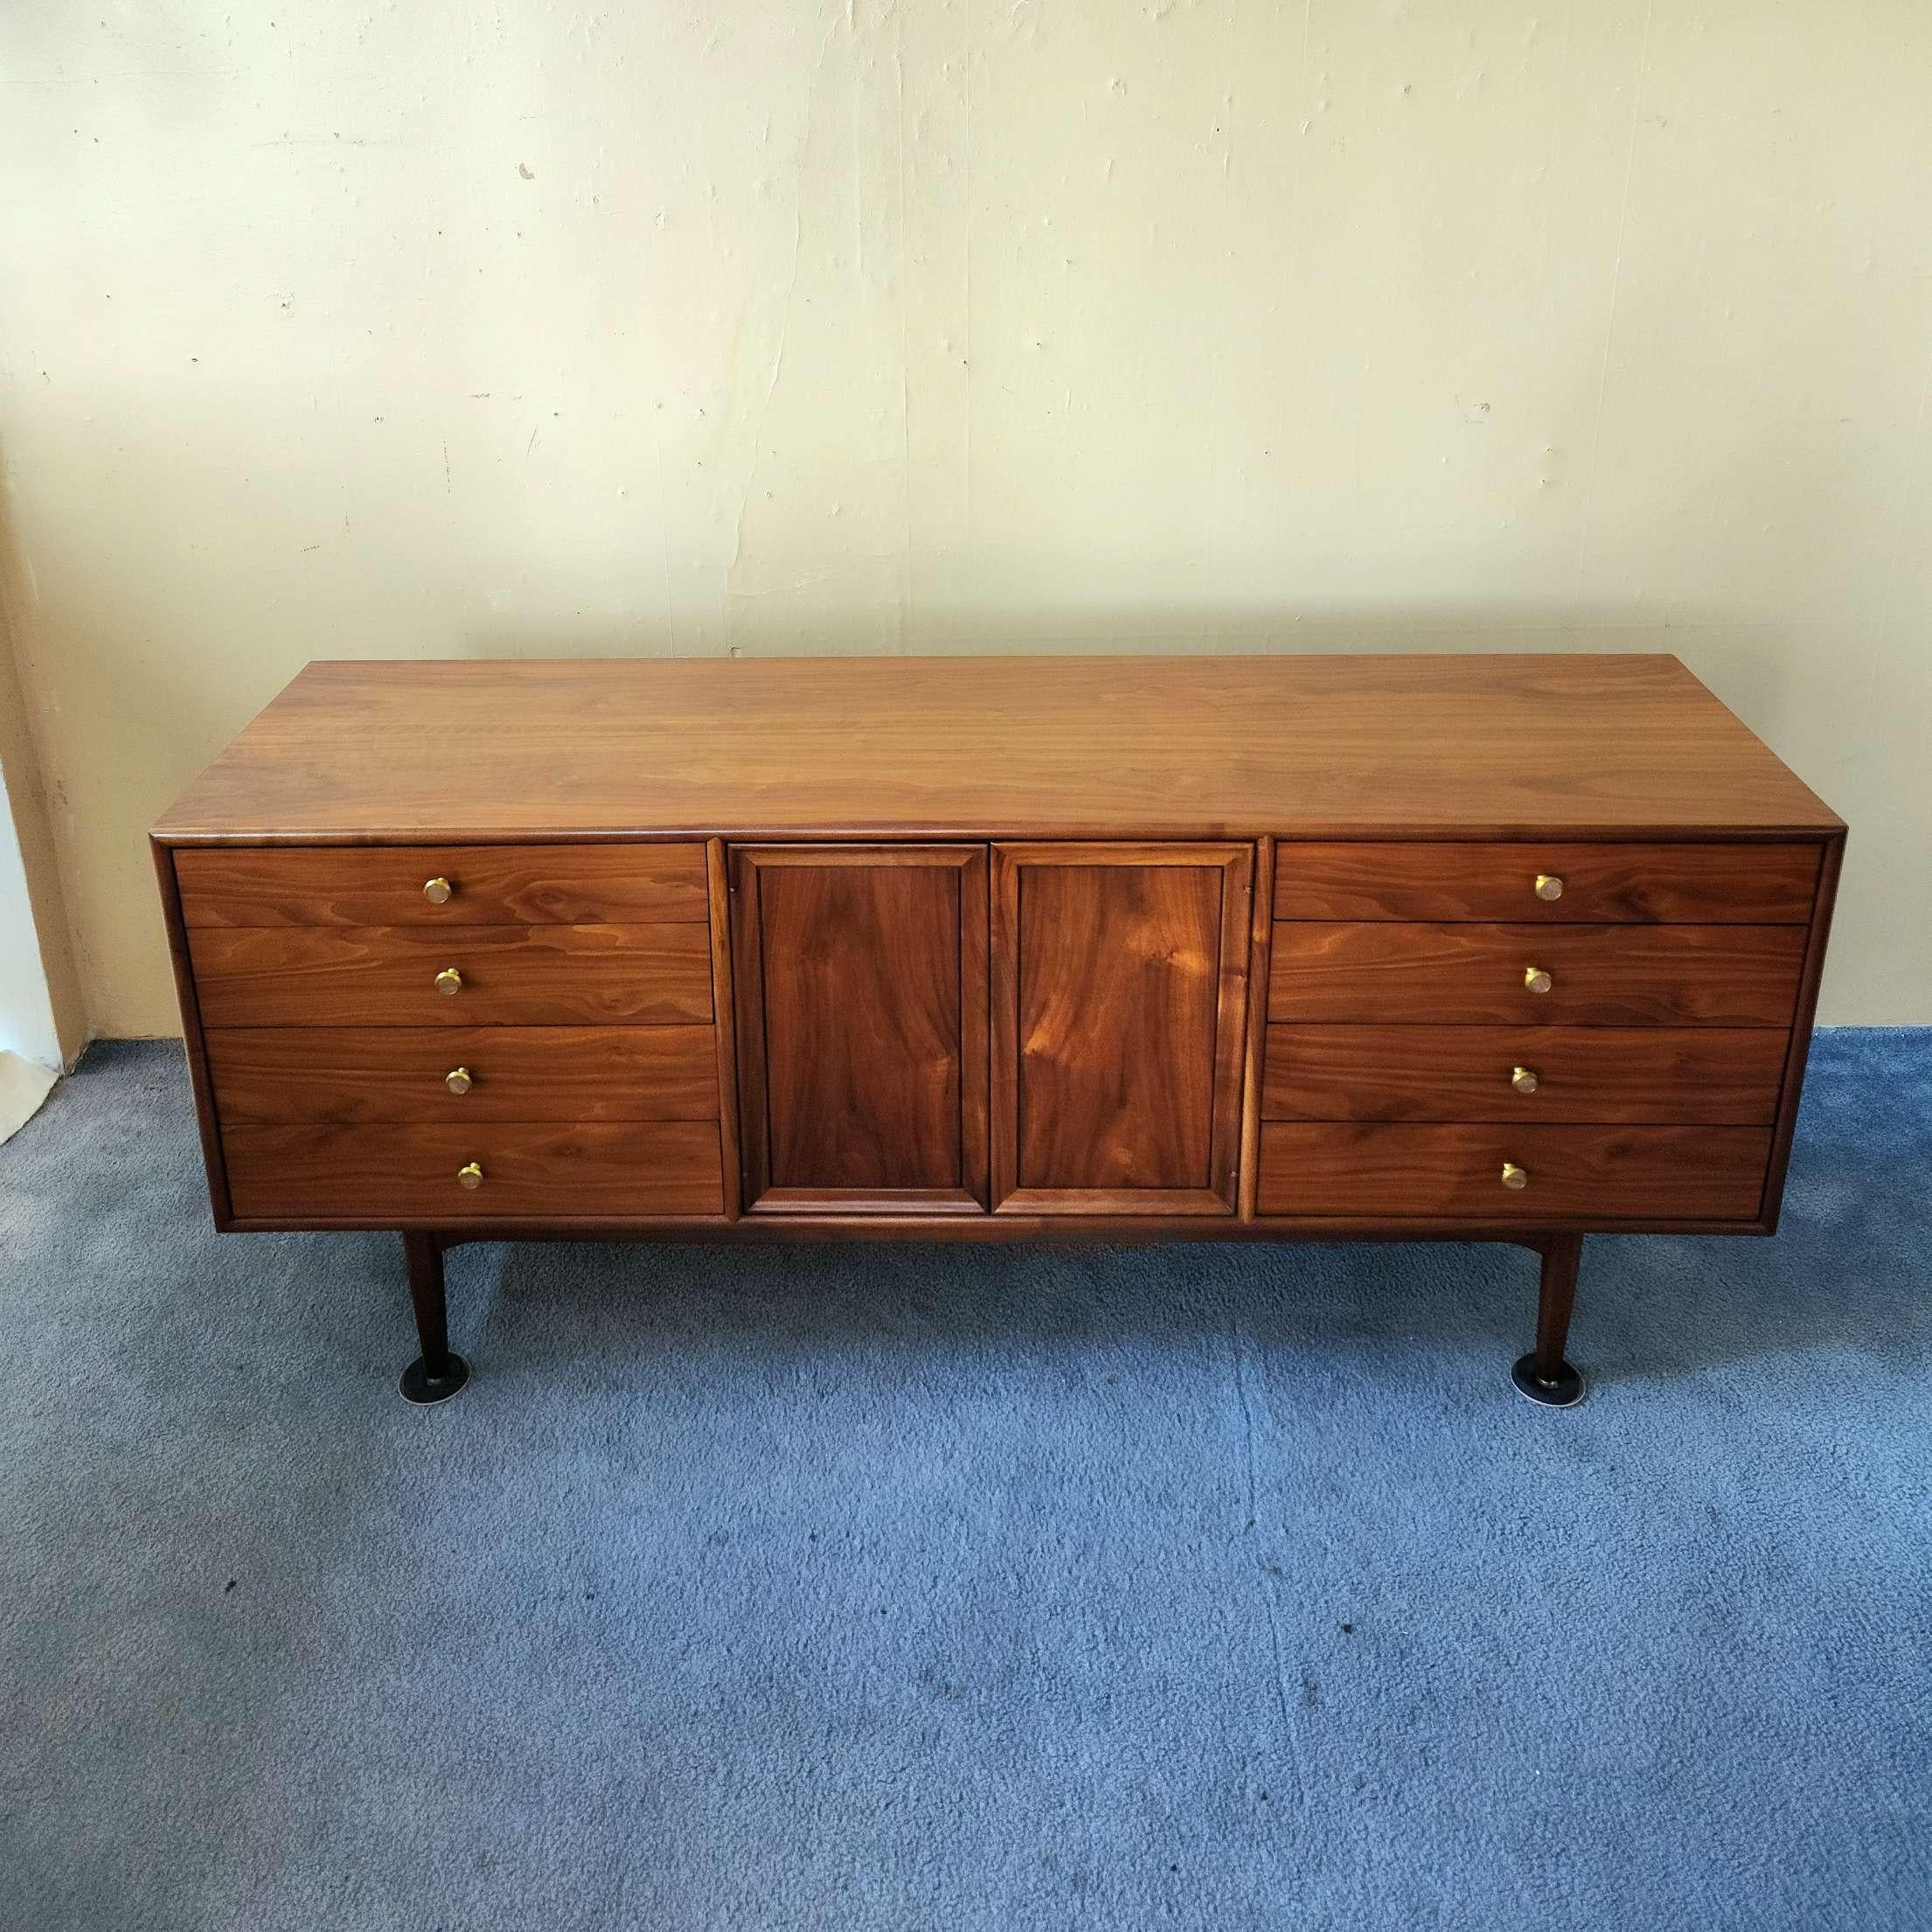 This gorgeous Mid-Century Modern eleven drawer dresser was designed by Kipp Stewart and Stewart MacDougall for Drexel’s Declaration Collection, circa 1960’s. Featuring a solid, beautifully grained walnut wood case and frame. This dresser was